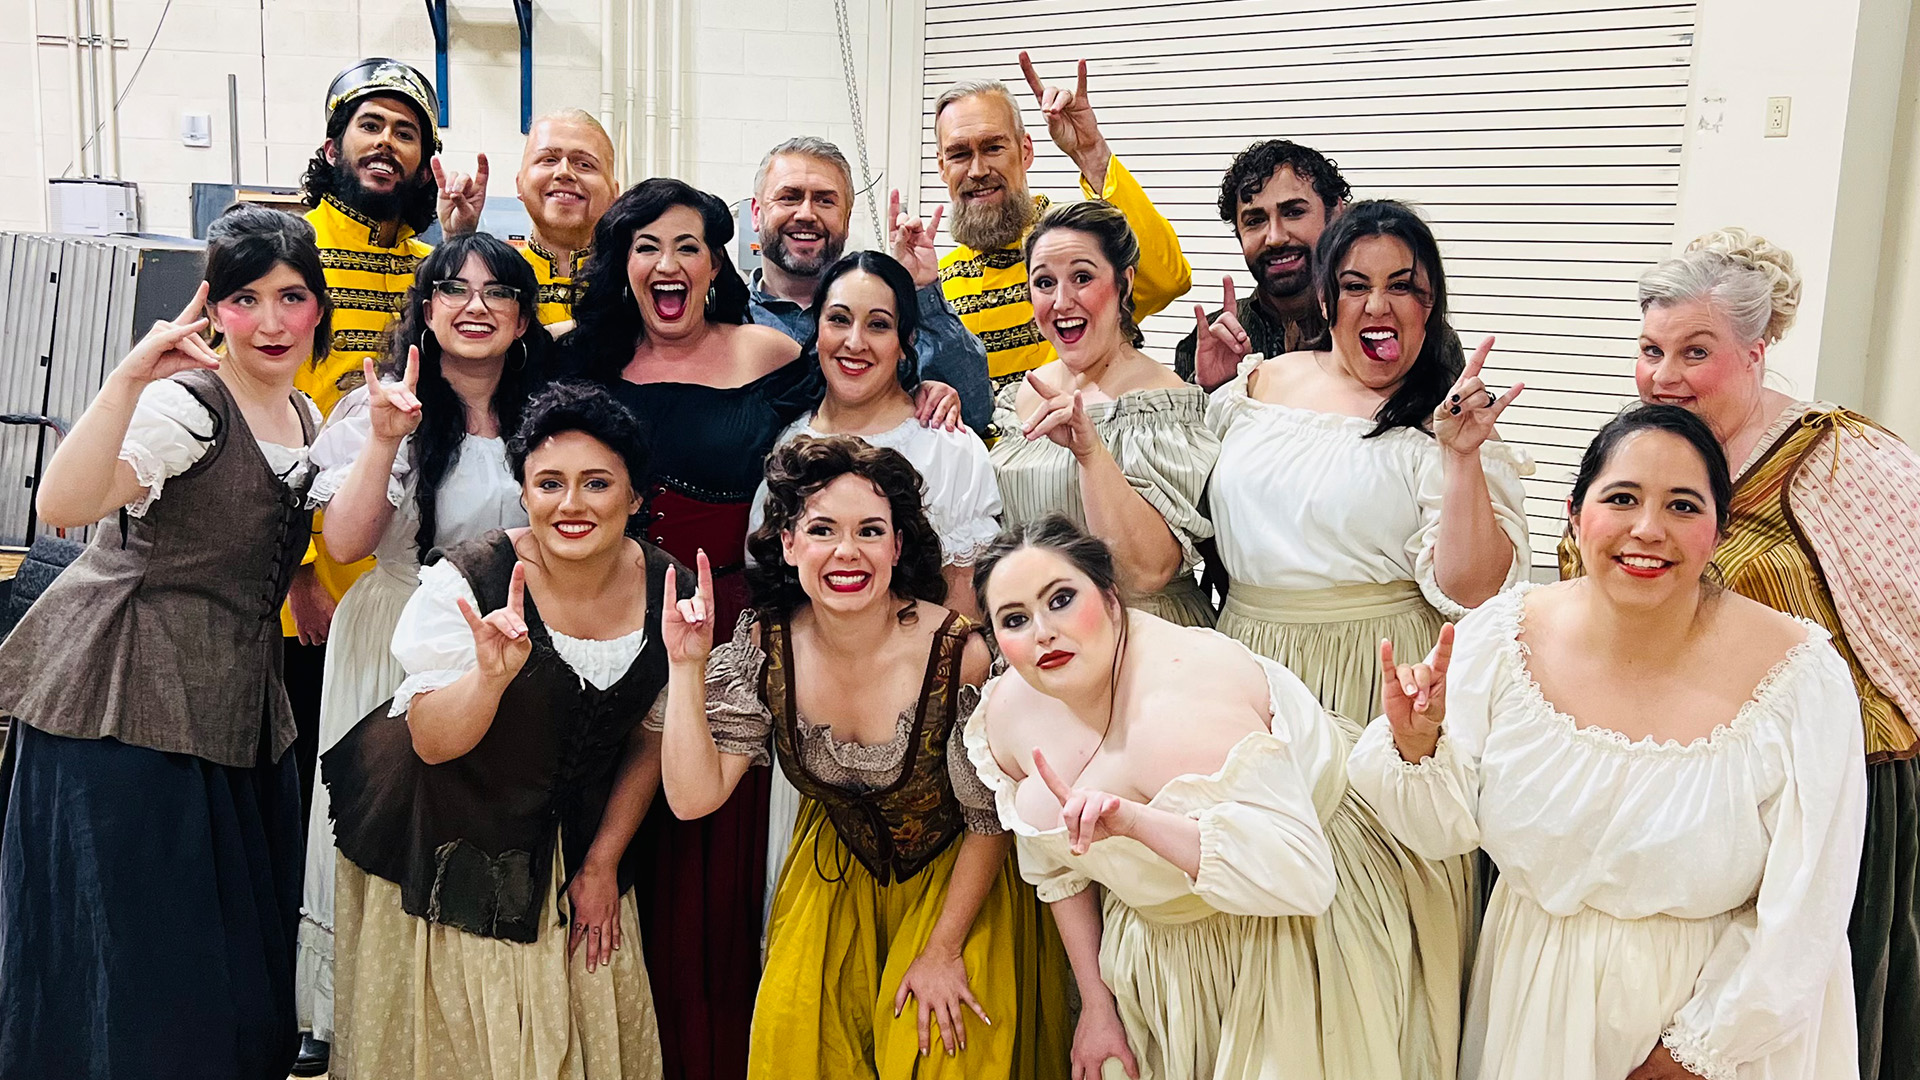 the cast members of Carmen pose for group shot backstage